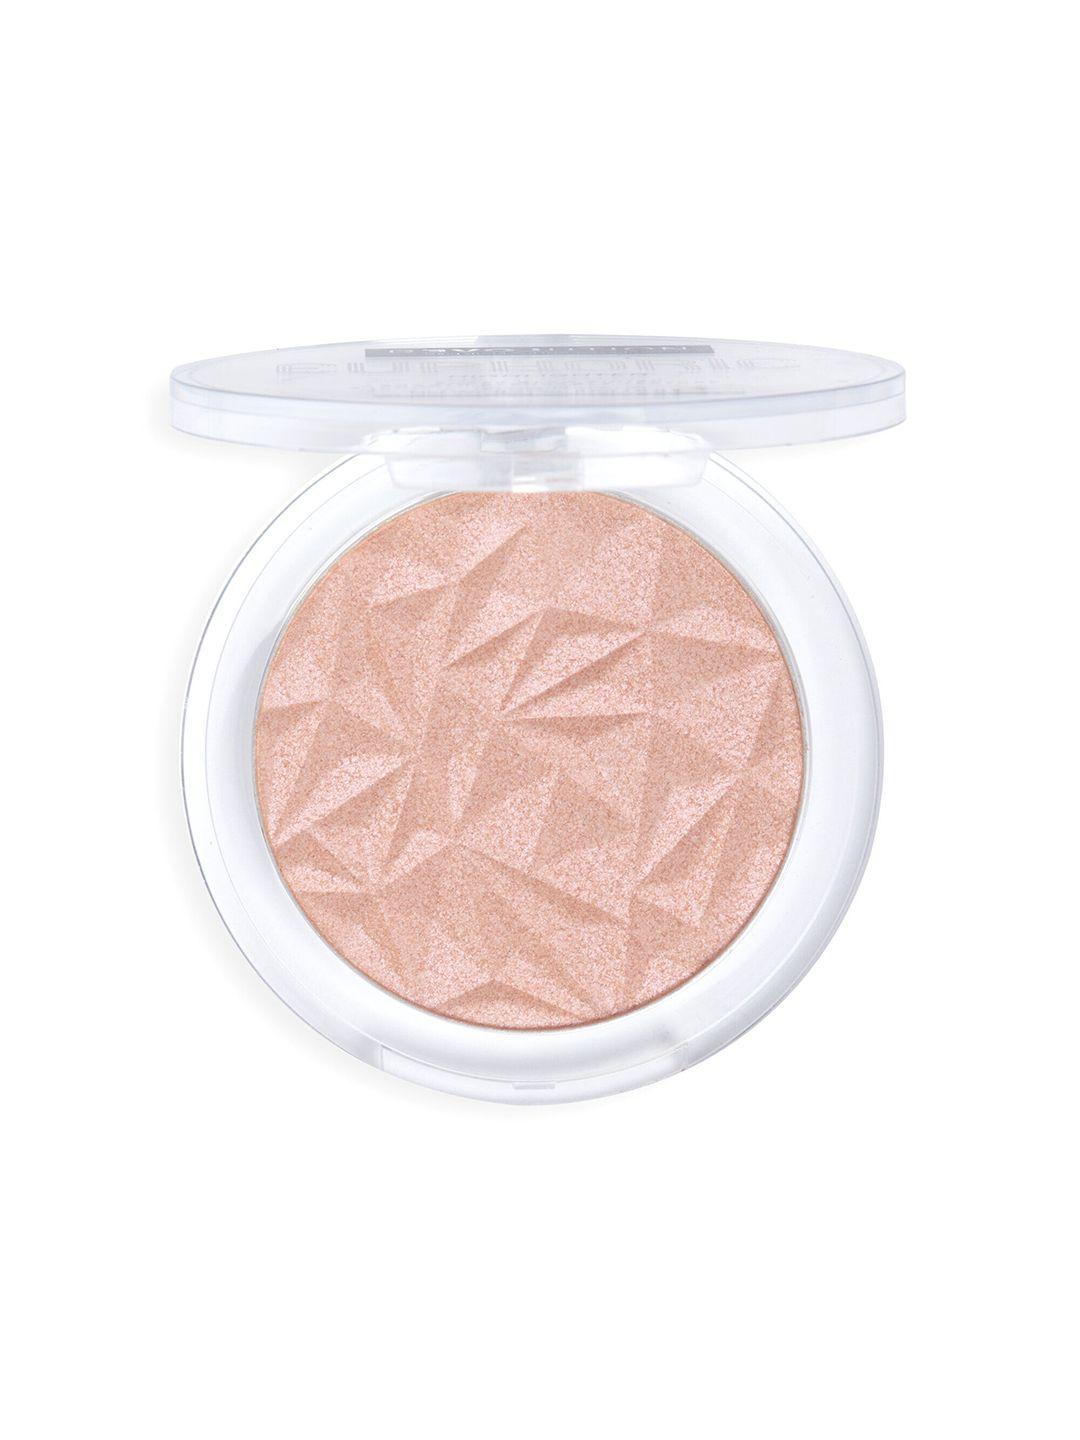 relove highlighter with super glow finish 6 g - euphoric